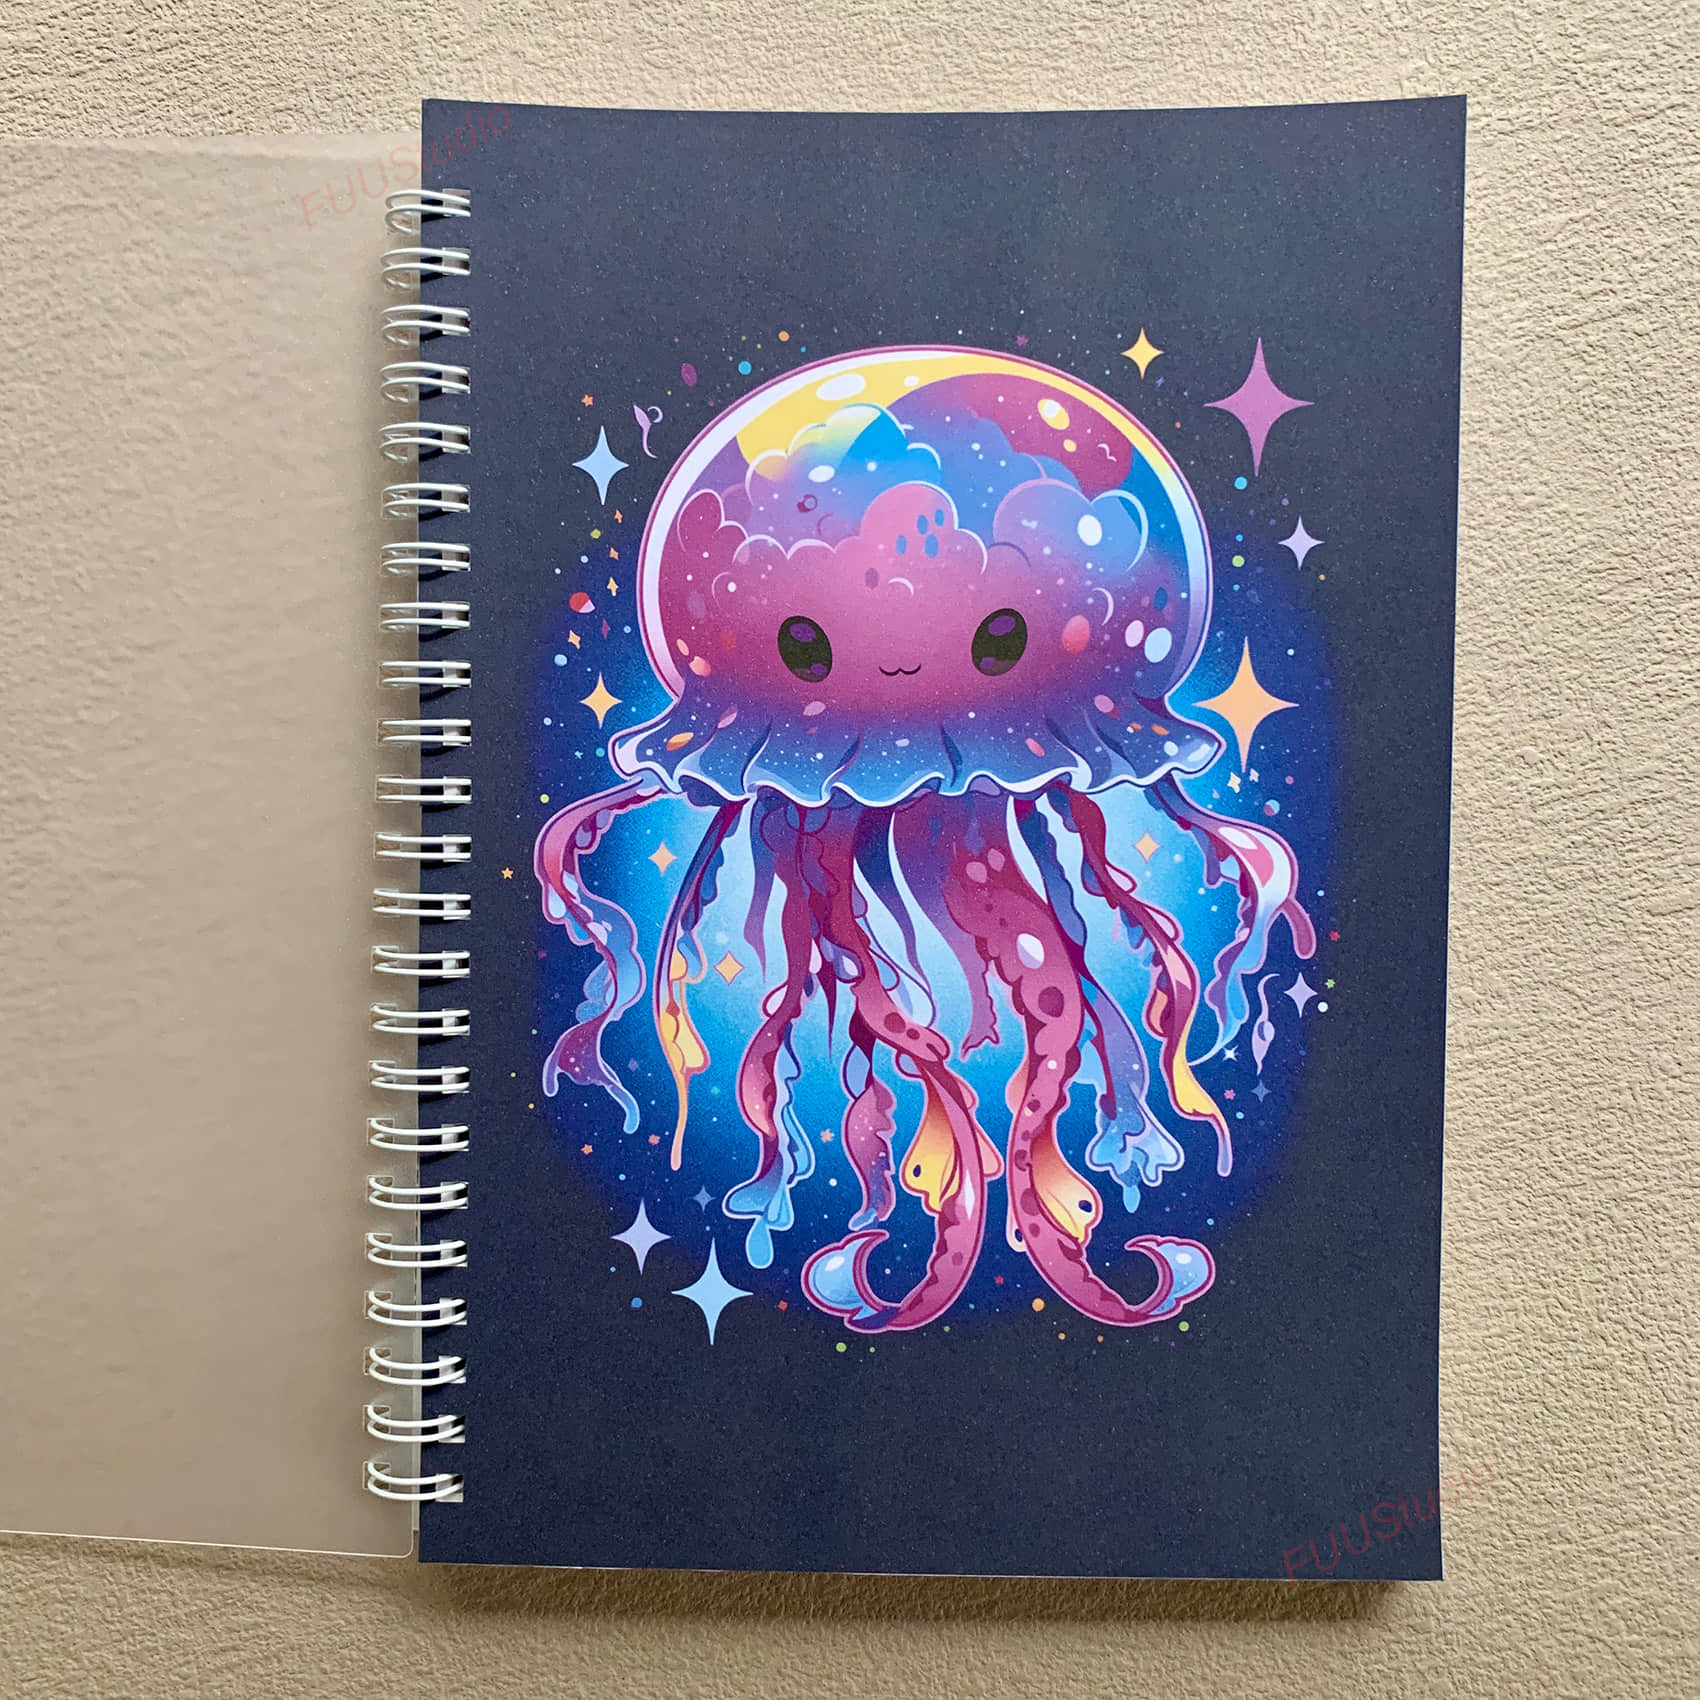 Black background Kawaii jellyfish Reusable Sticker Book A5 size, 50 double-sided pages